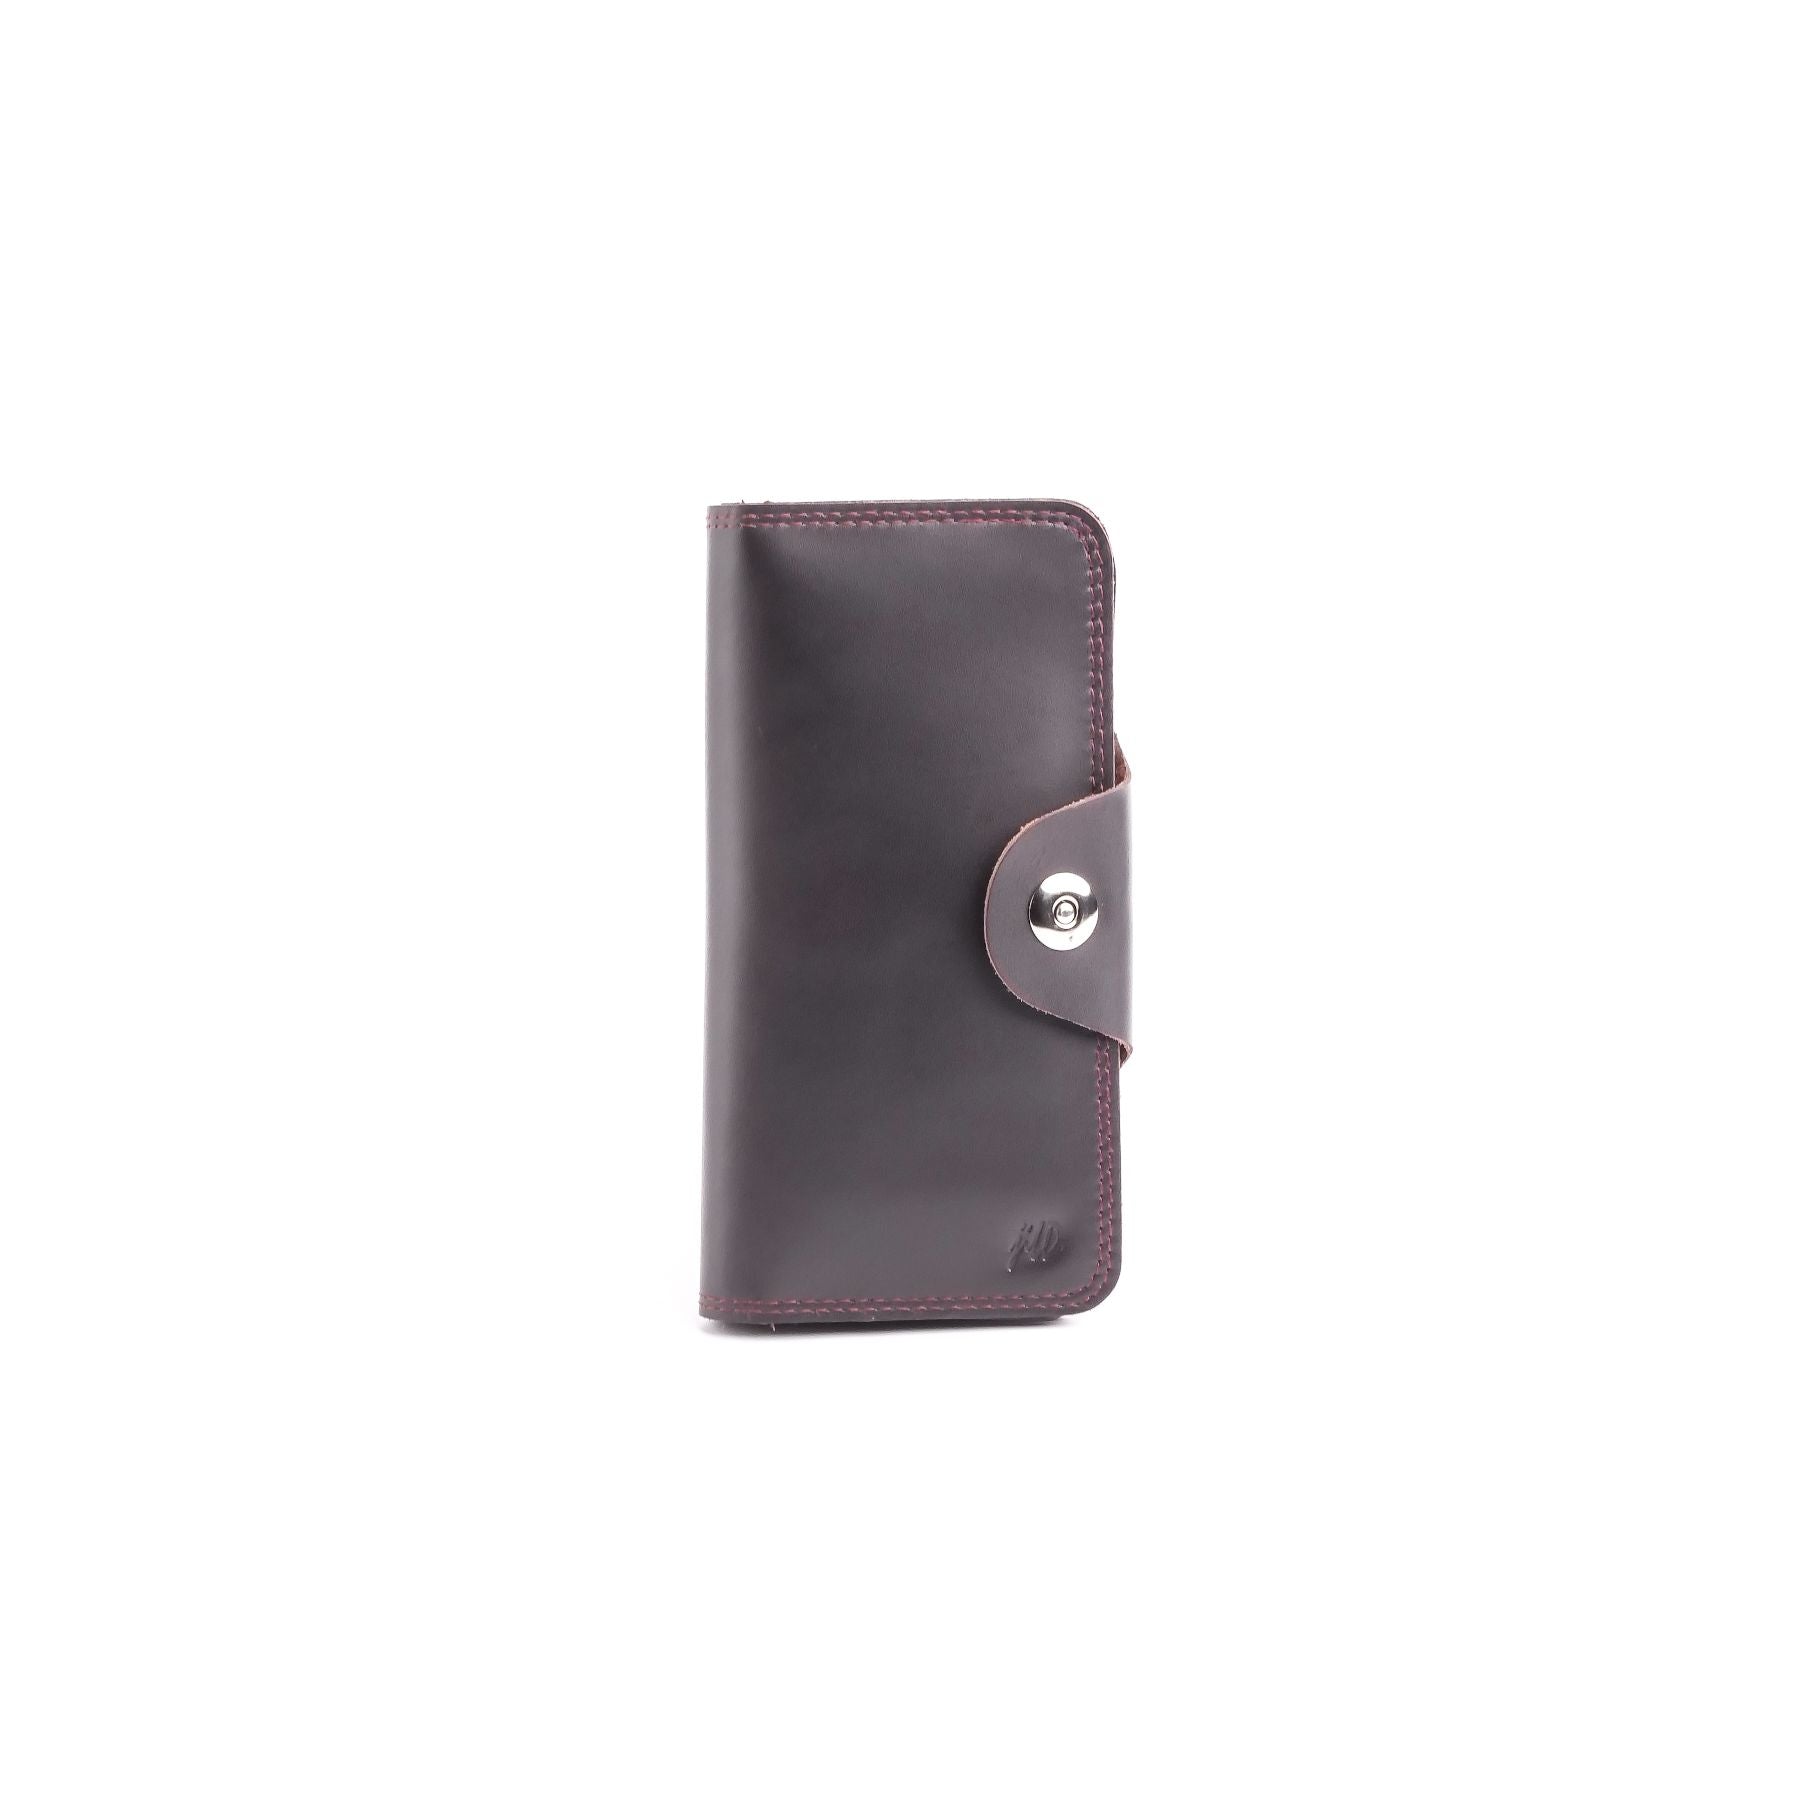 Tri-Fold Pure Leather Long Wallet With Button Closure-BURGUNDY